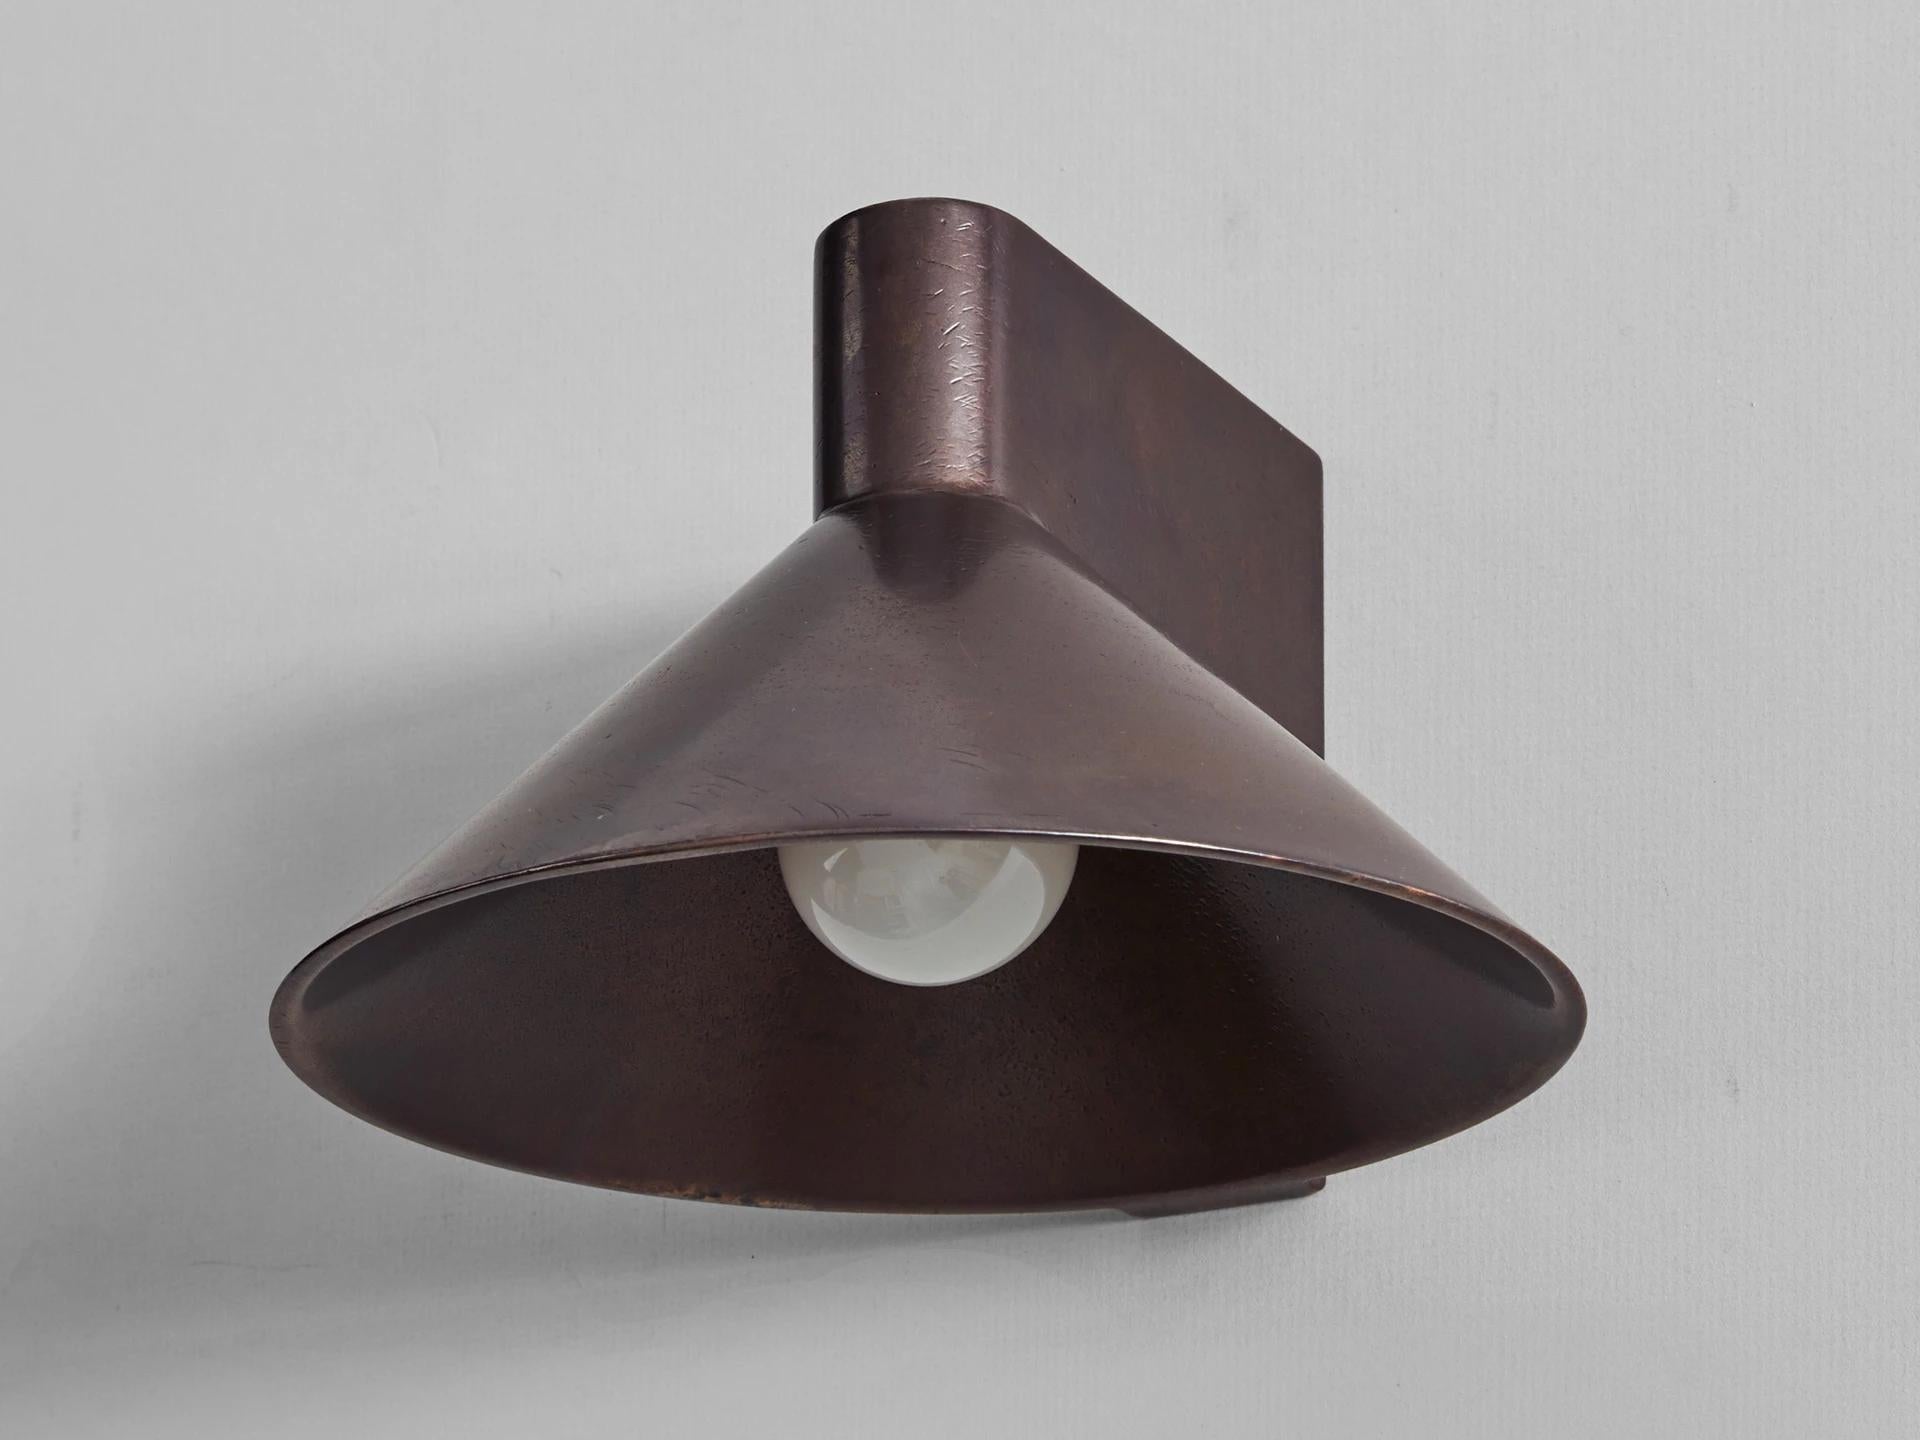 Blackened bronze wall light by Henry Wilson
Lost wax cast in solid bronze, the conical wall light is our most complex production casting to date. Each piece is hand finished and can be mounted to any surface as an up or down light, using a discrete